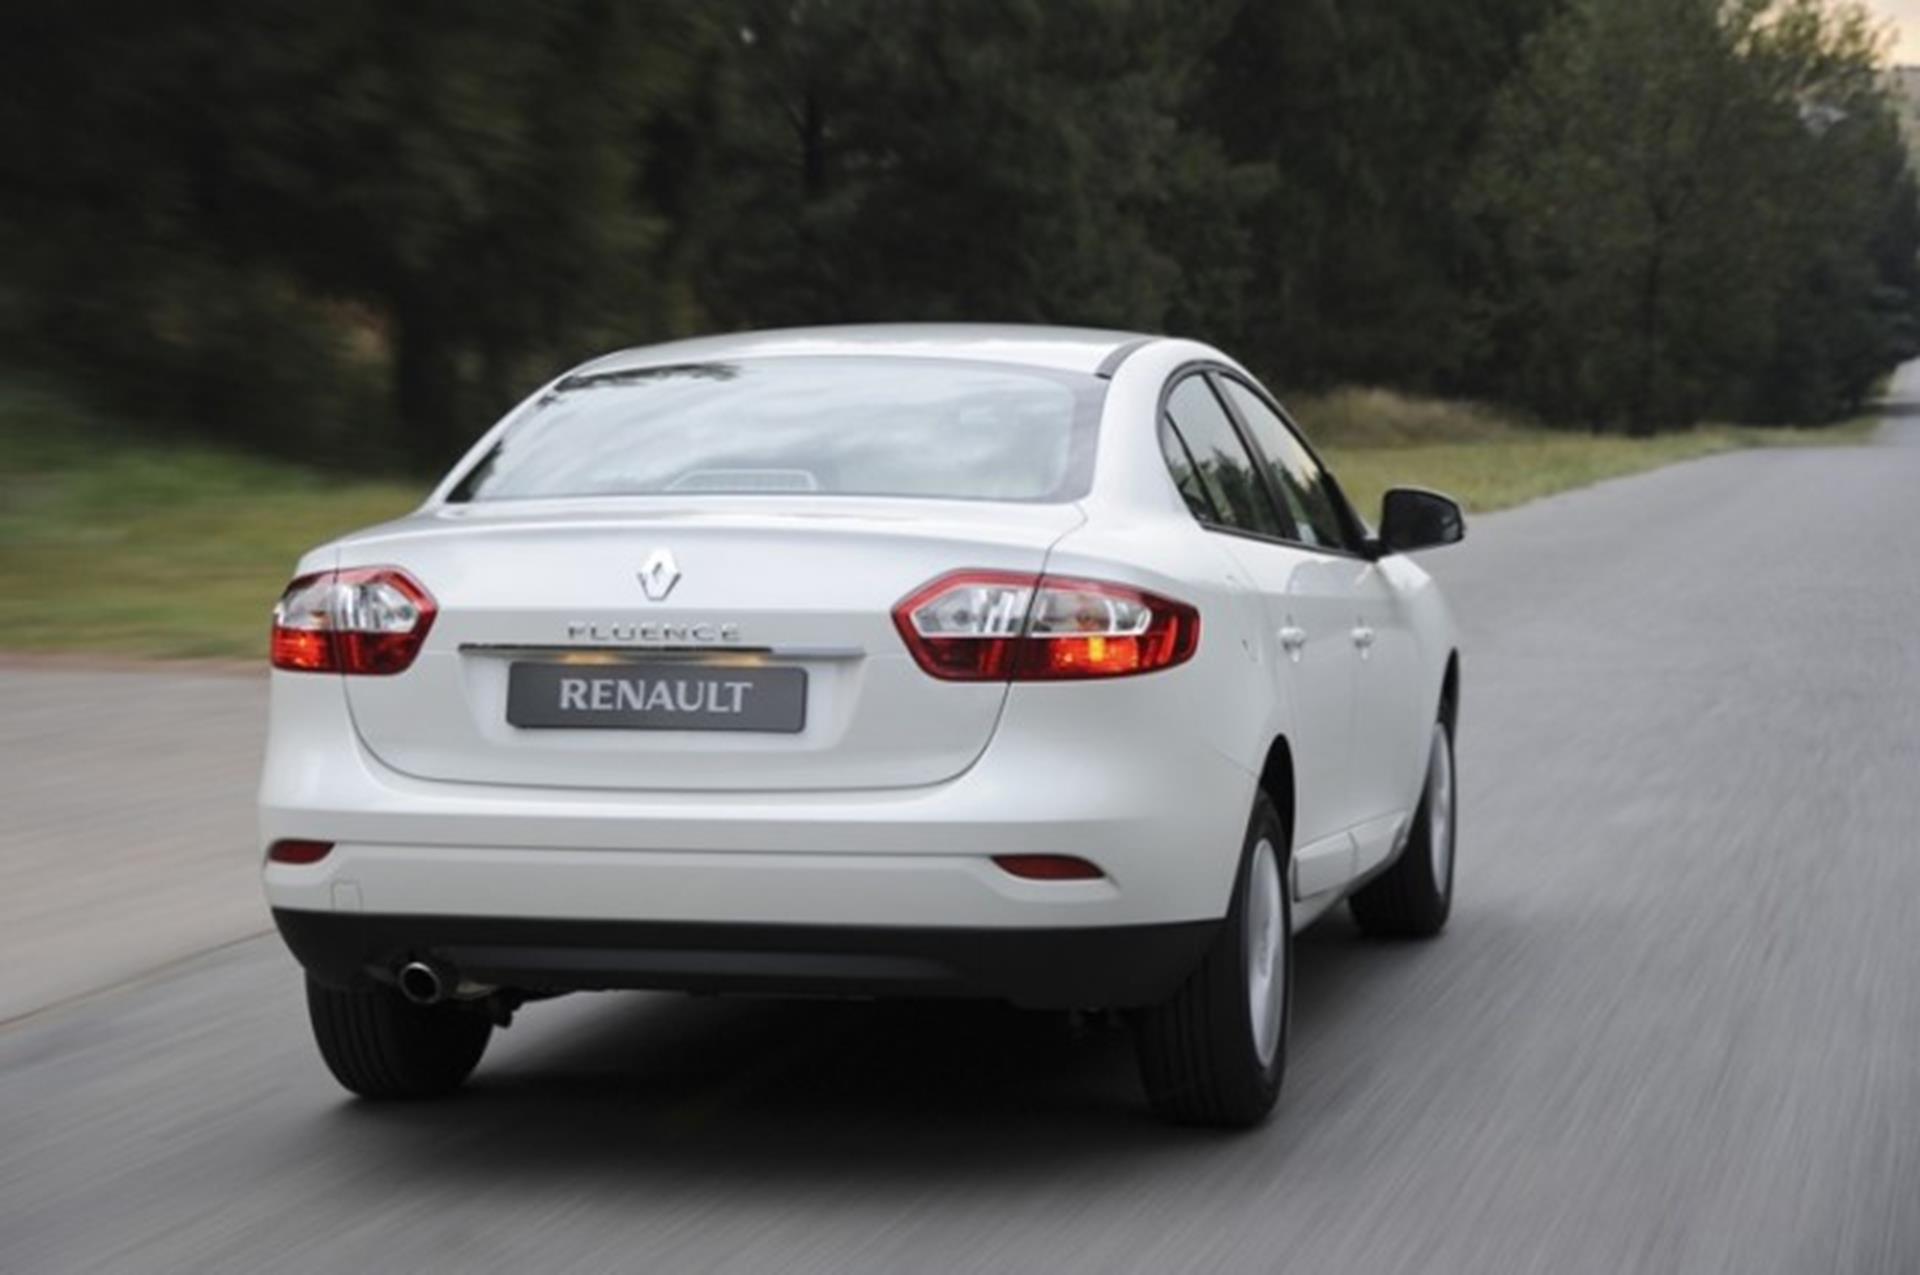 RENAULT FLUENCE South Africa: New Authentique model adds